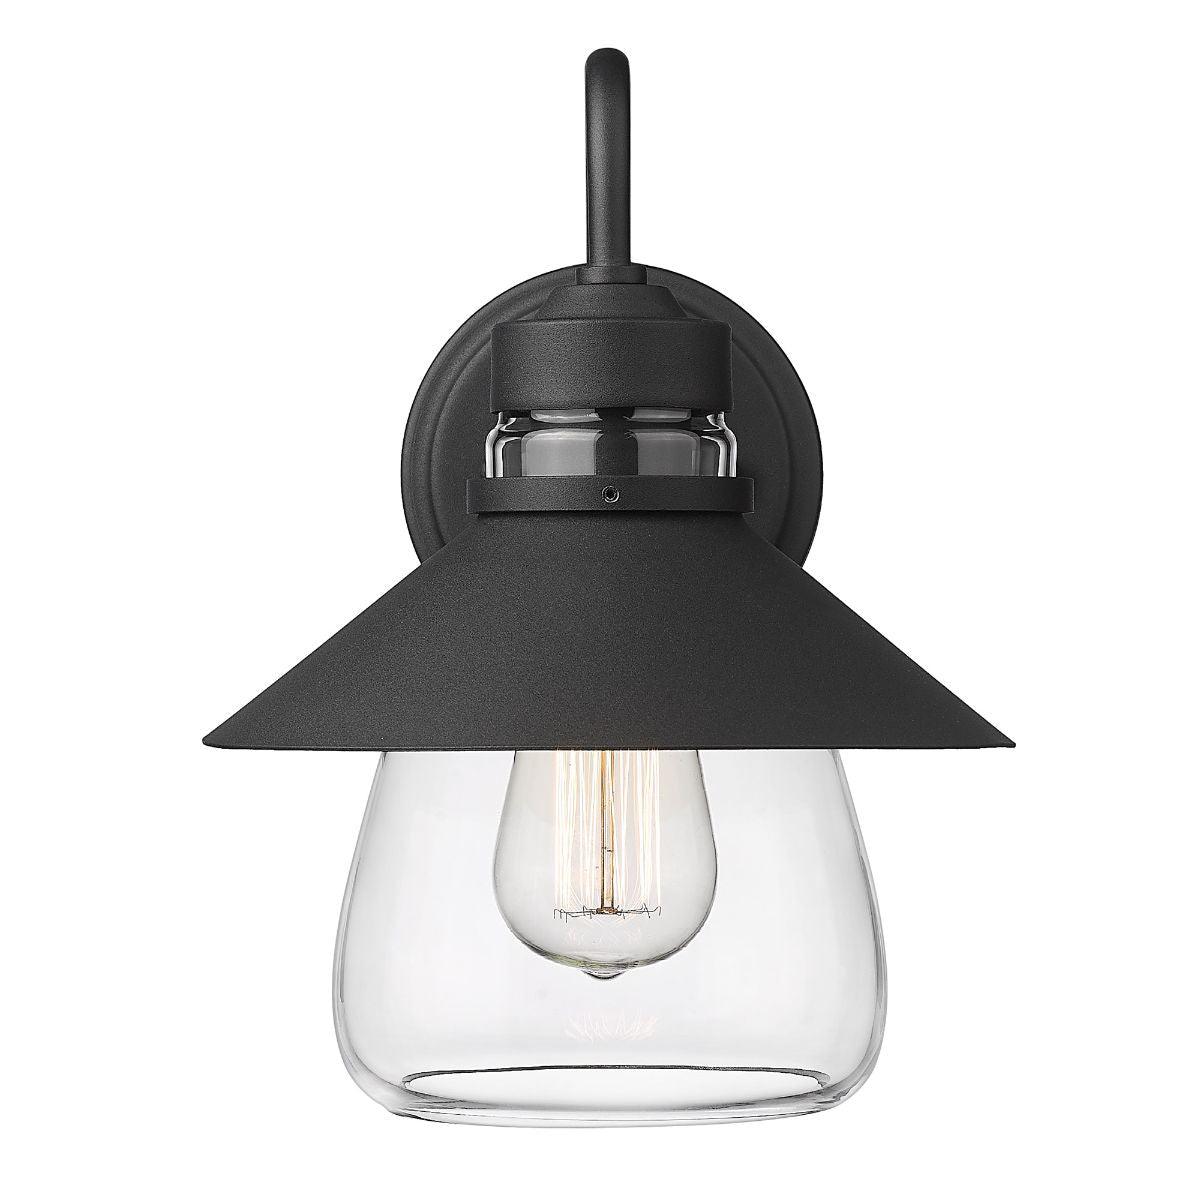 Demi 12 in. Outdoor Wall Light Black Finish